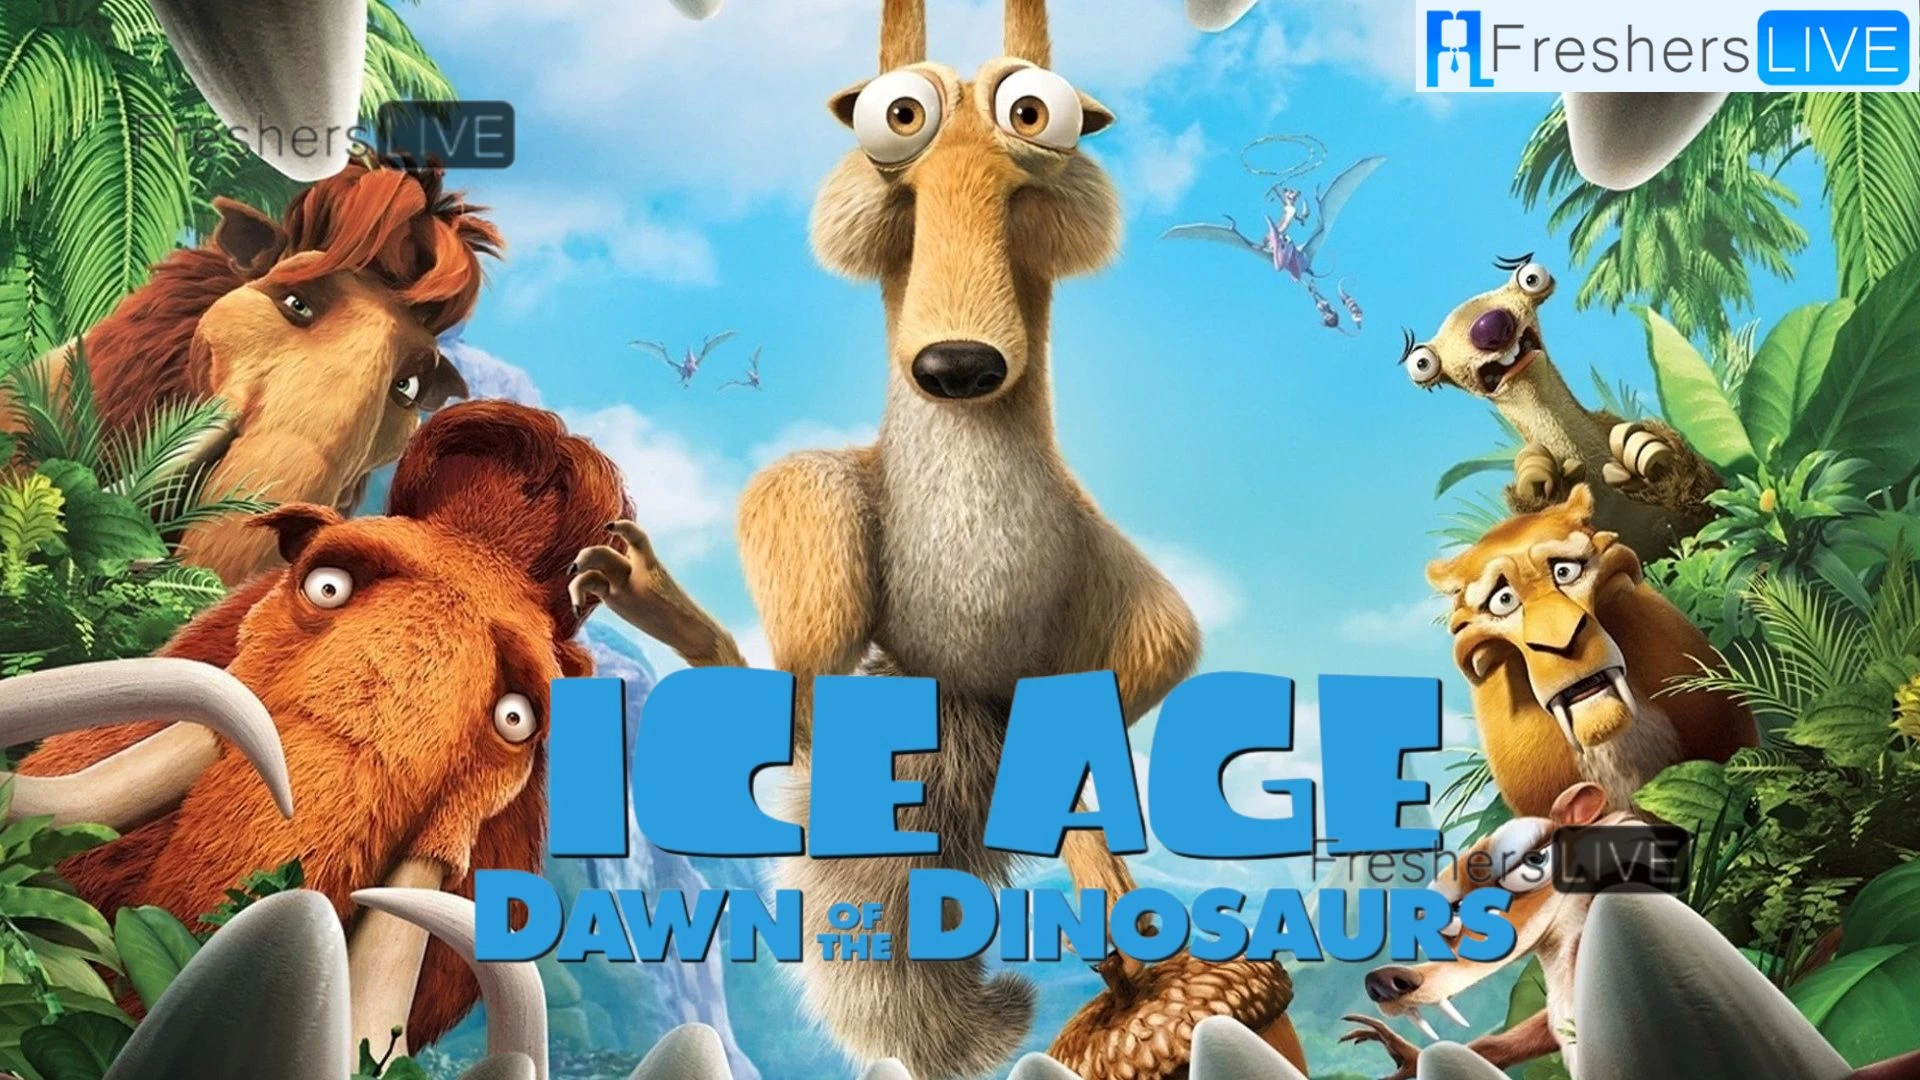 Why is Ice Age Dawn of the Dinosaurs not on Disney Plus? Where to Watch the Ice Age Dawn of the Dinosaurs?